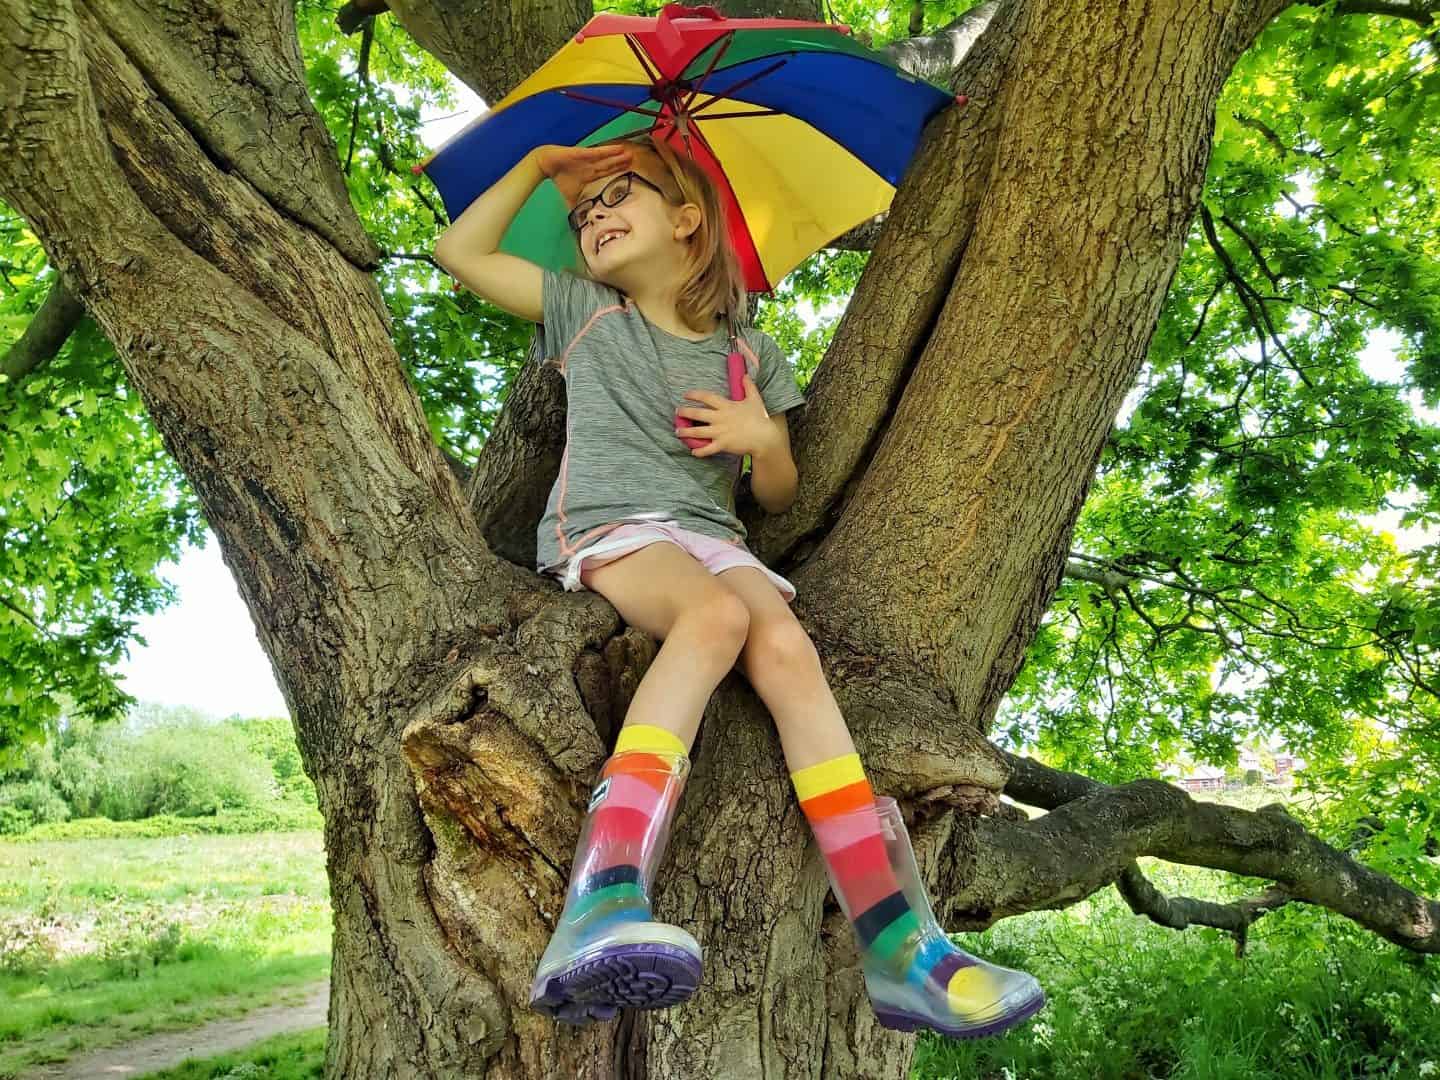 Little girl with rainbow umbrella sitting in a tree wearing squelch wellies and rainbow socks looking into the distance